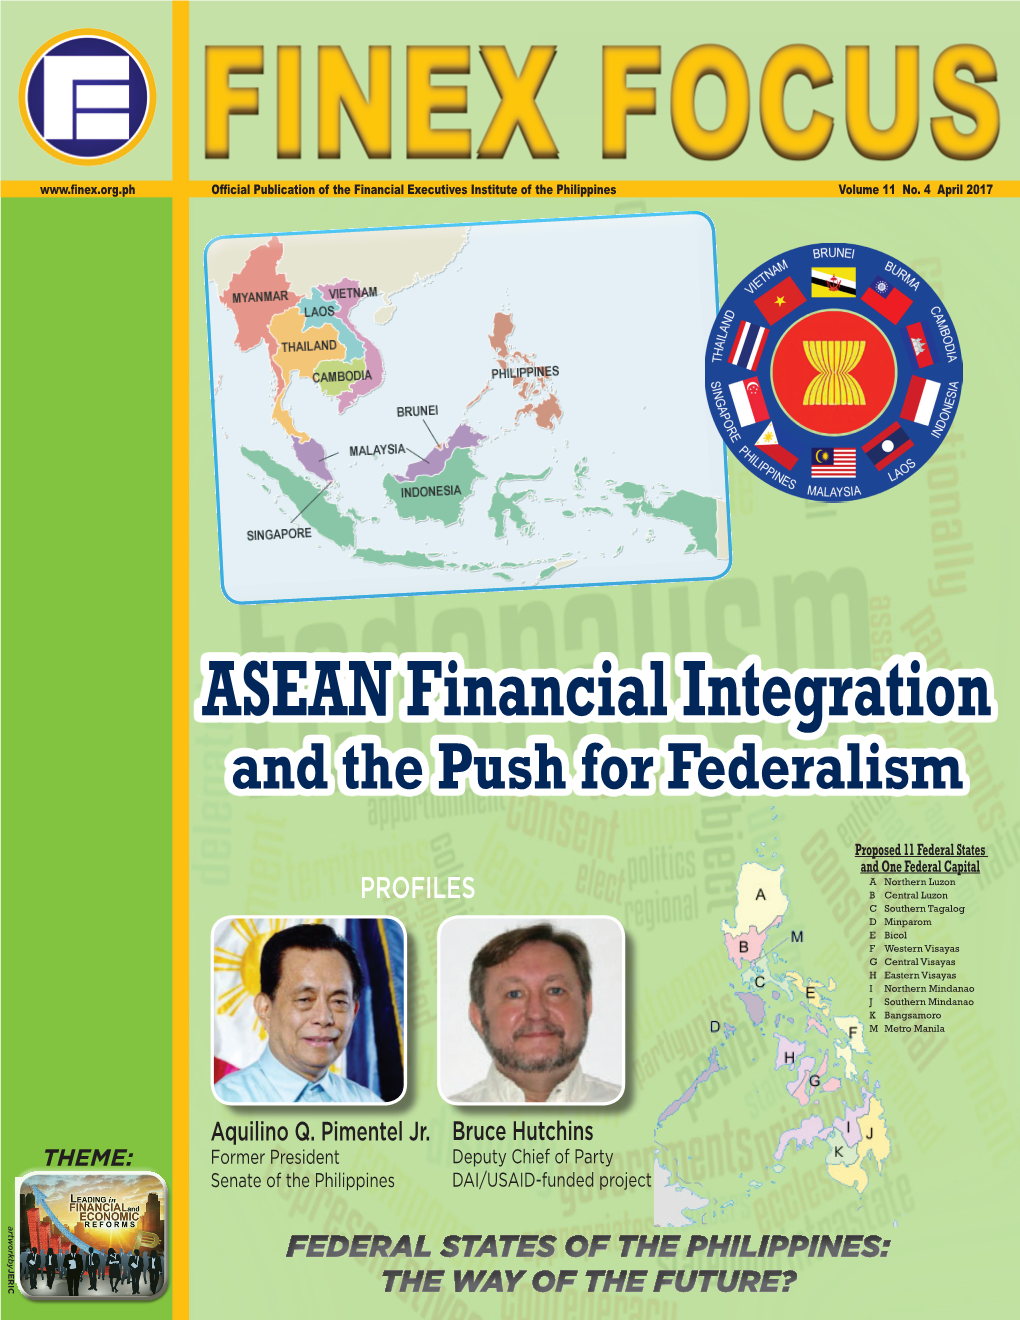 ASEAN Financial Integration and the Push for Federalism